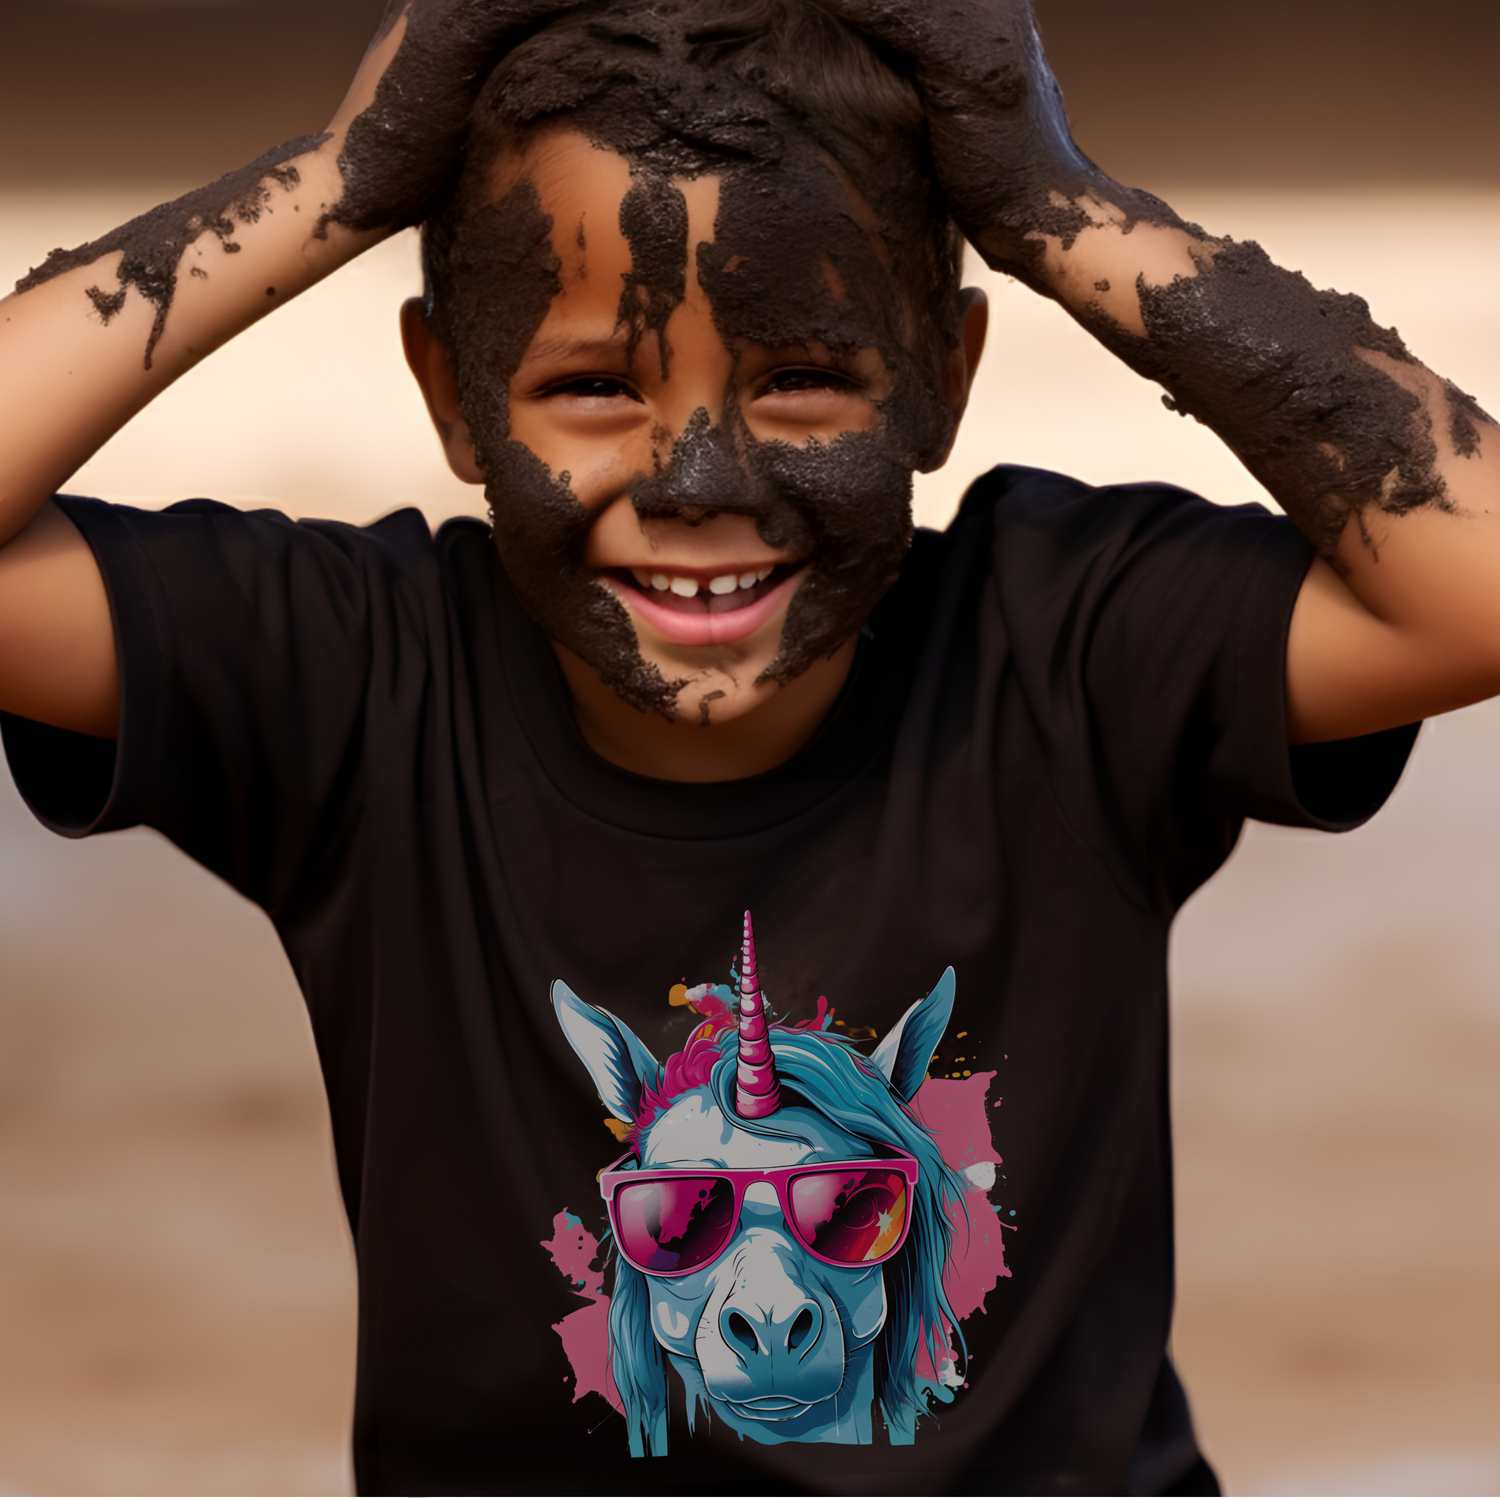 Boy playing in mud wearing a t-shirt with an urban unicorn design